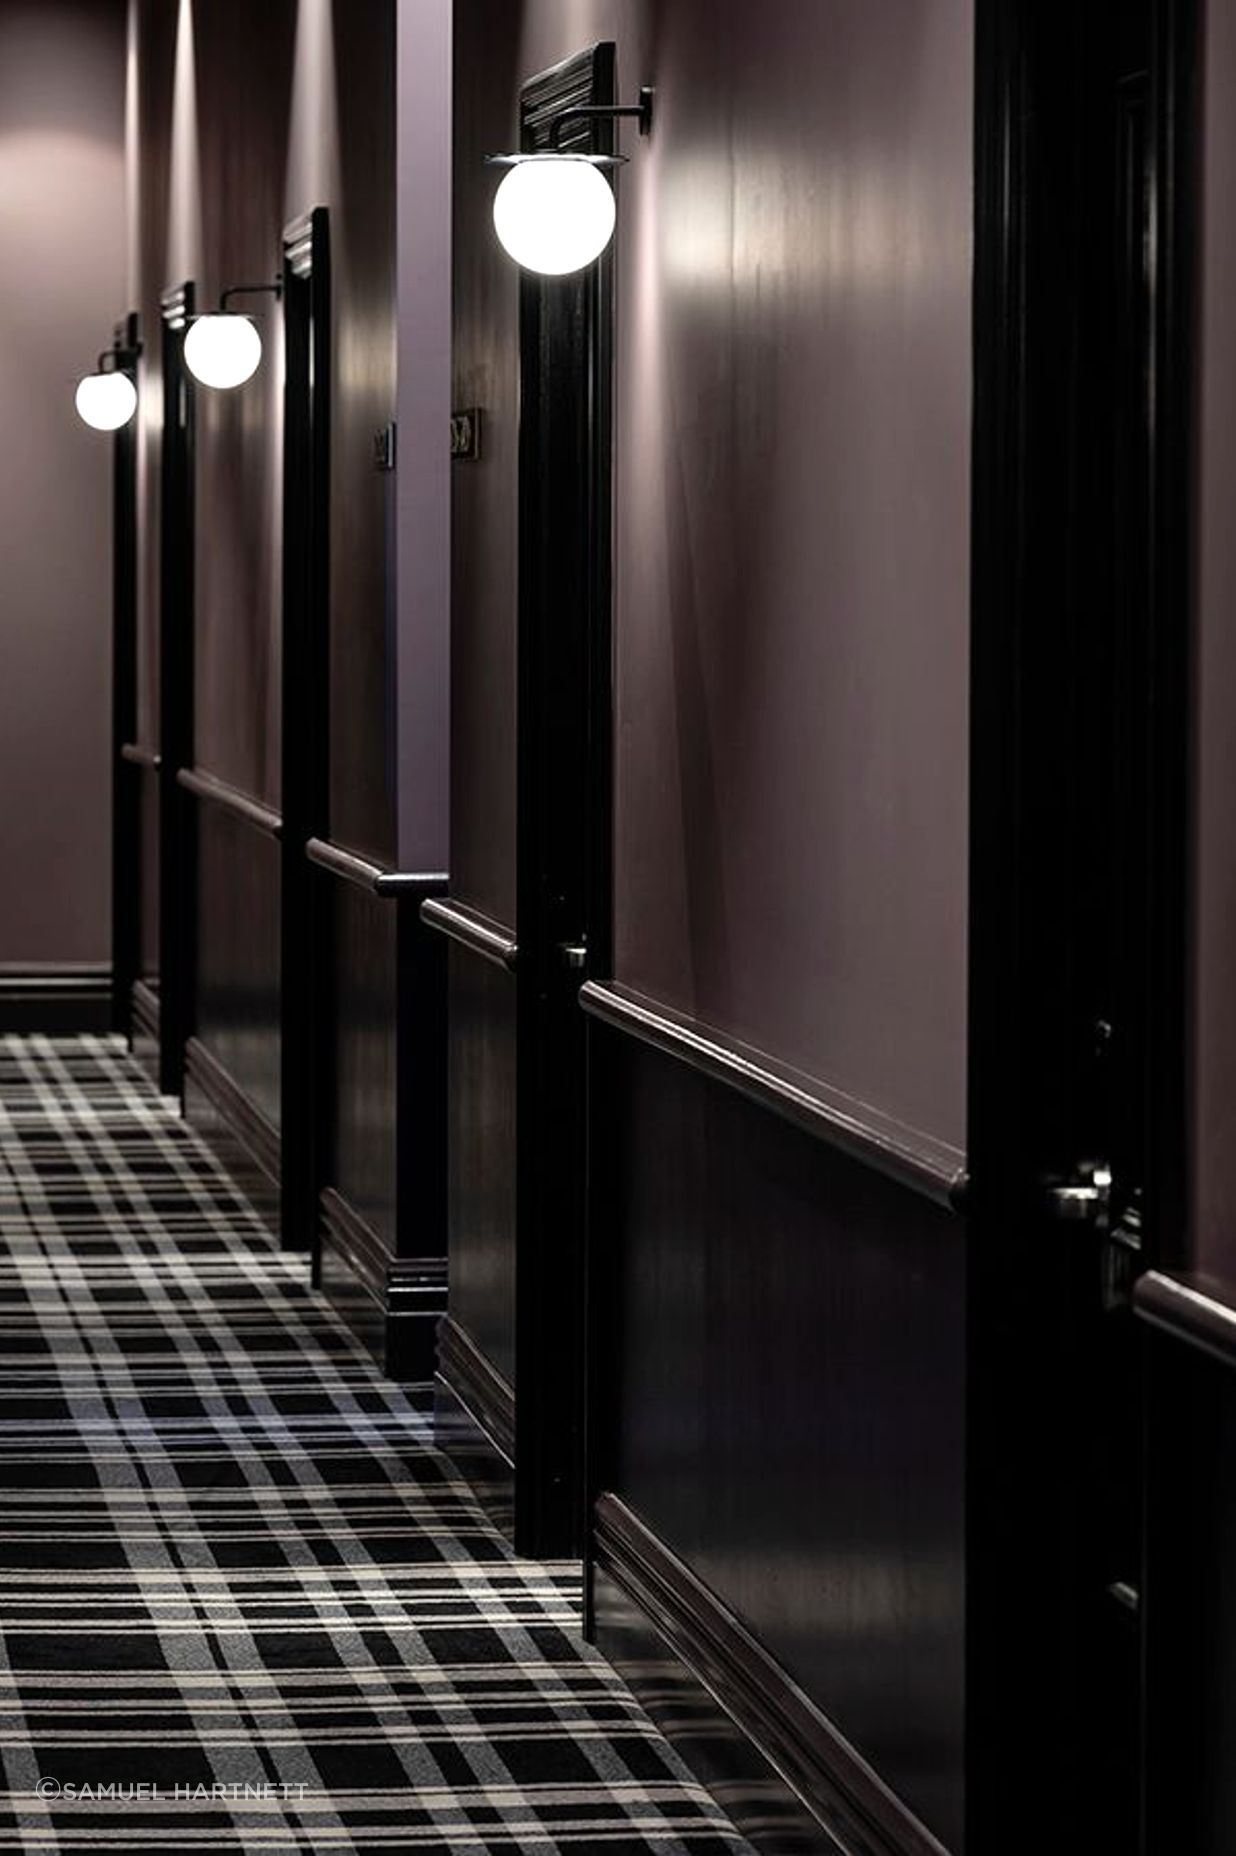 The corridors to the guest rooms. The plaid carpet is a nod to the age of the building, and references threads of the Silk Road, part of the sea captain’s literary tale.